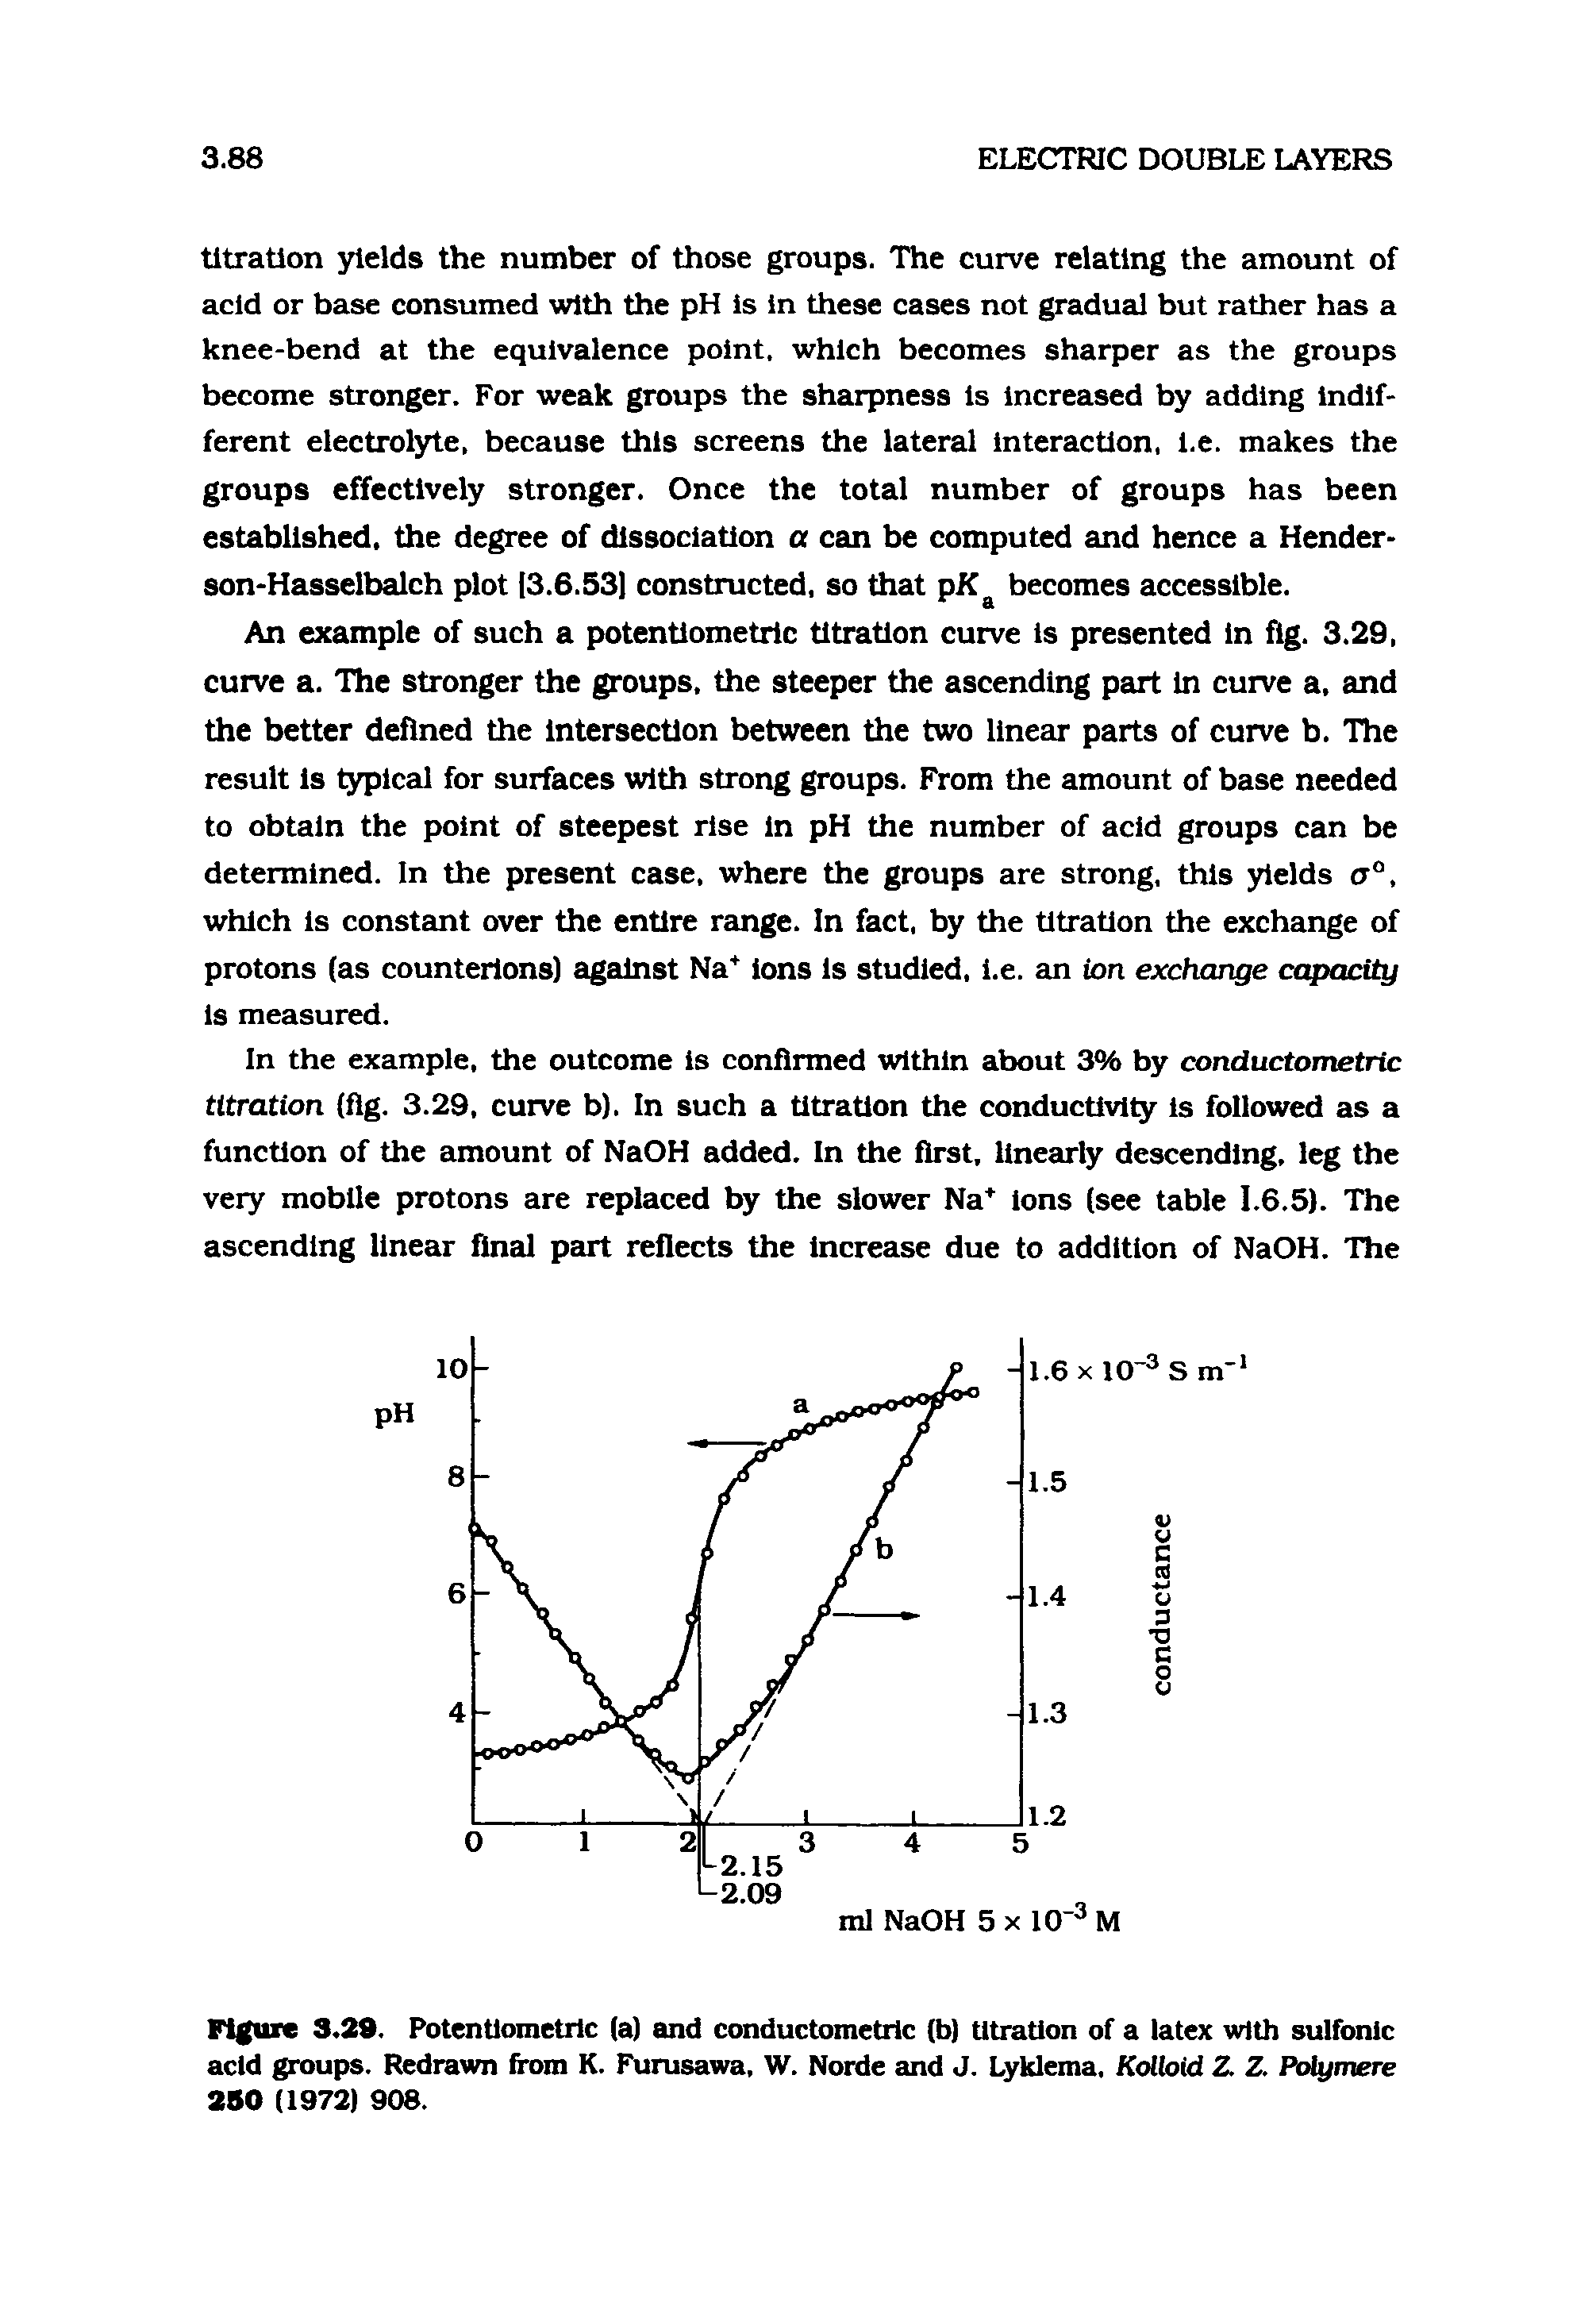 Figure 3.29. Potentlometric (a) and conductometric (b) titration of a latex with sulfonic acid groups. Redrawn from K. Furusawa, W. Norde and J. Lyklema, Kolloid Z. Z. Polymere 280 (1972) 908.